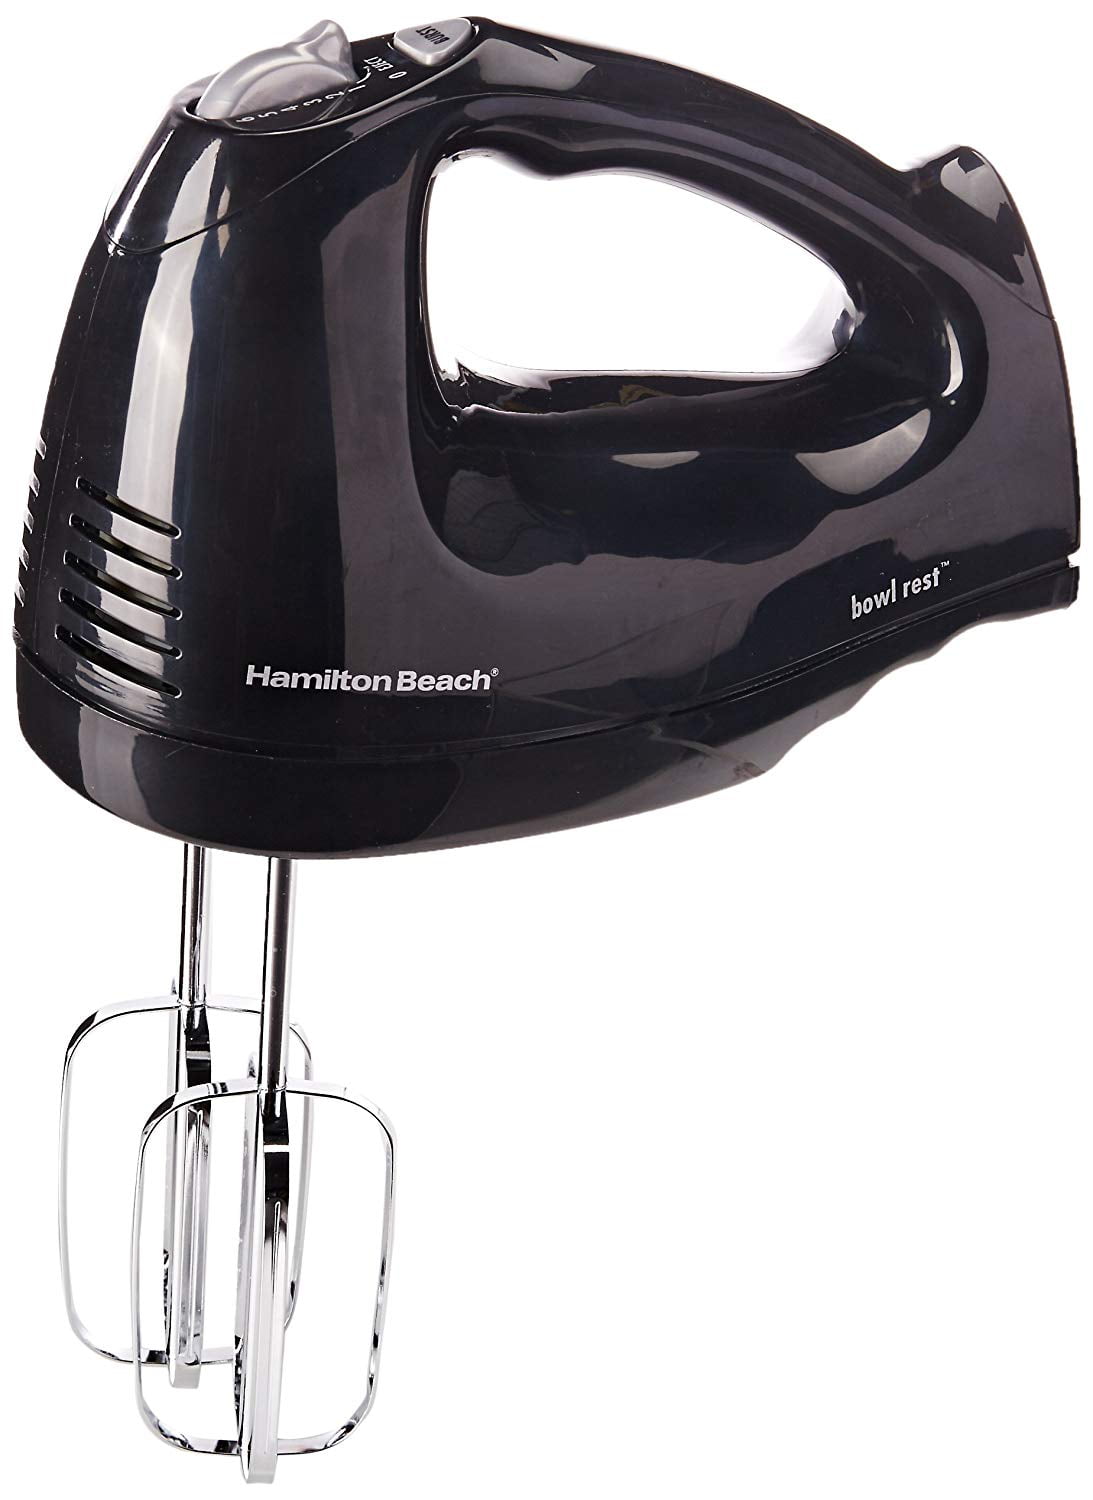 Brushed Stainless Hamilton Beach 62650 Classic 6-Speed Electric Hand Mixer with Snap-On Storage Case 